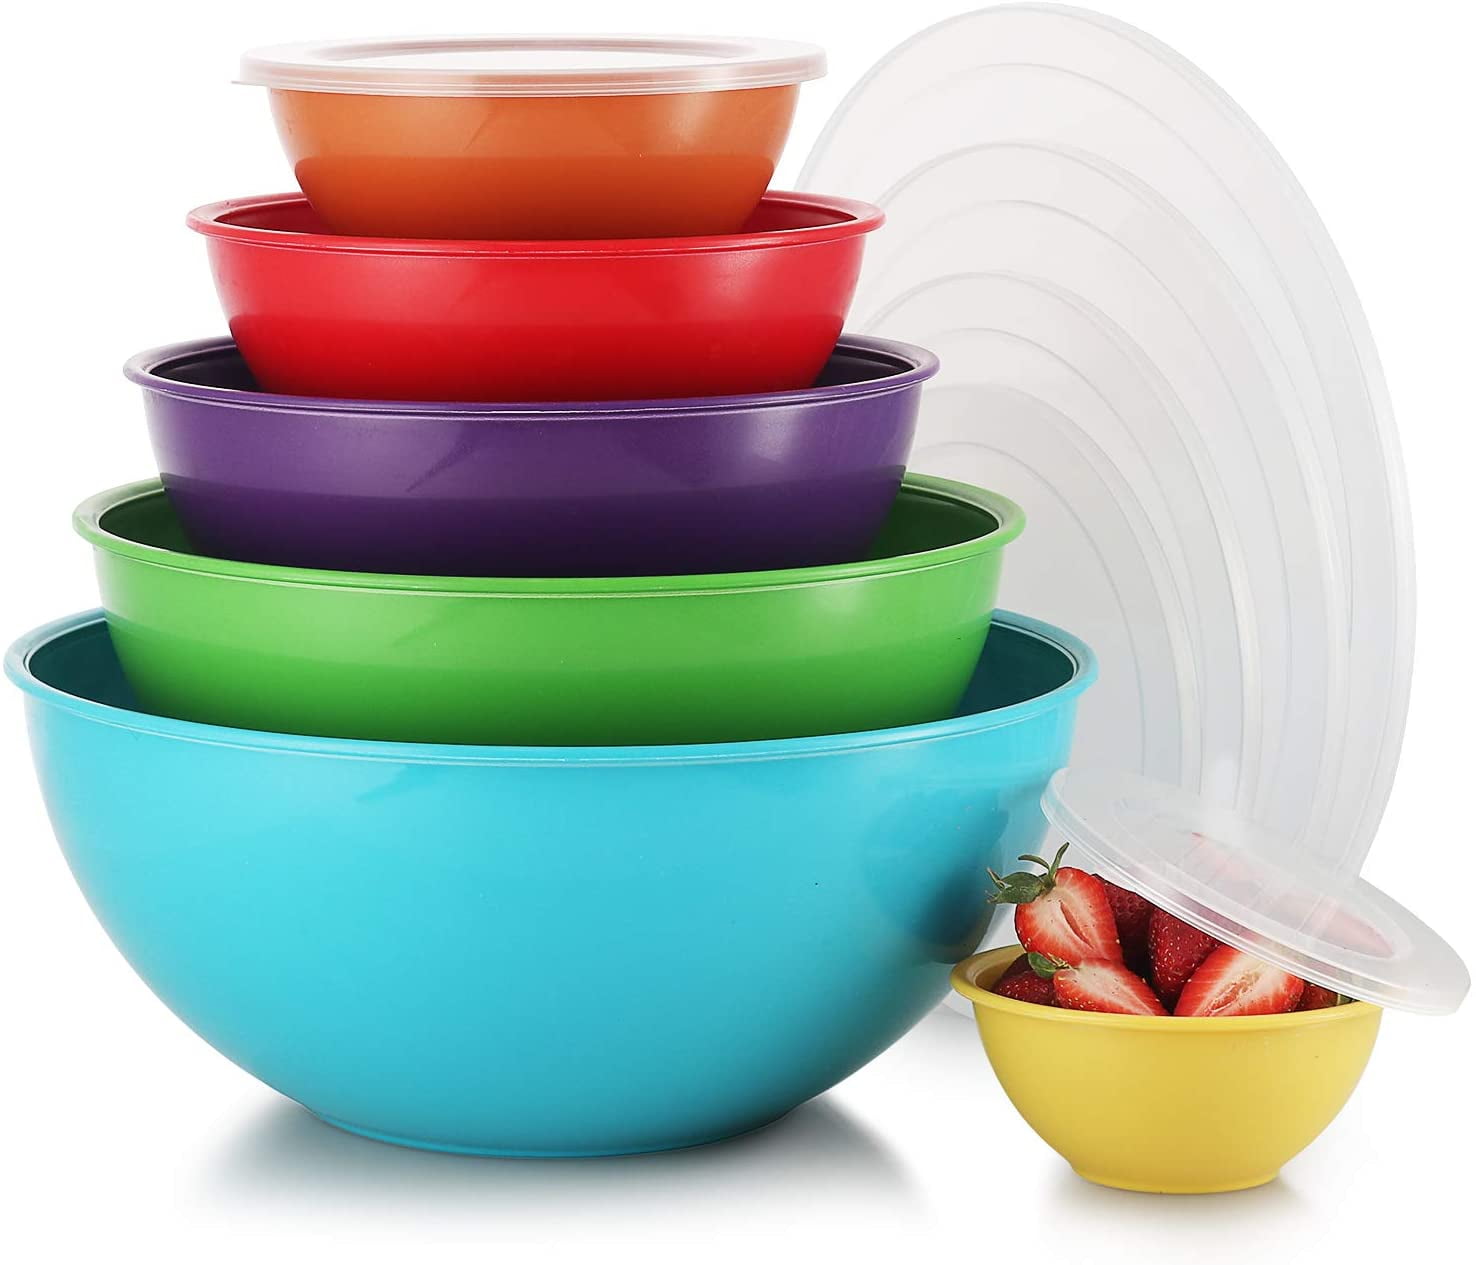 GREEN KITCHEN FOOD COOKING NONE SLIP MIXING BOWL BPA FREE PLASTIC CLEAR 6 LTR 